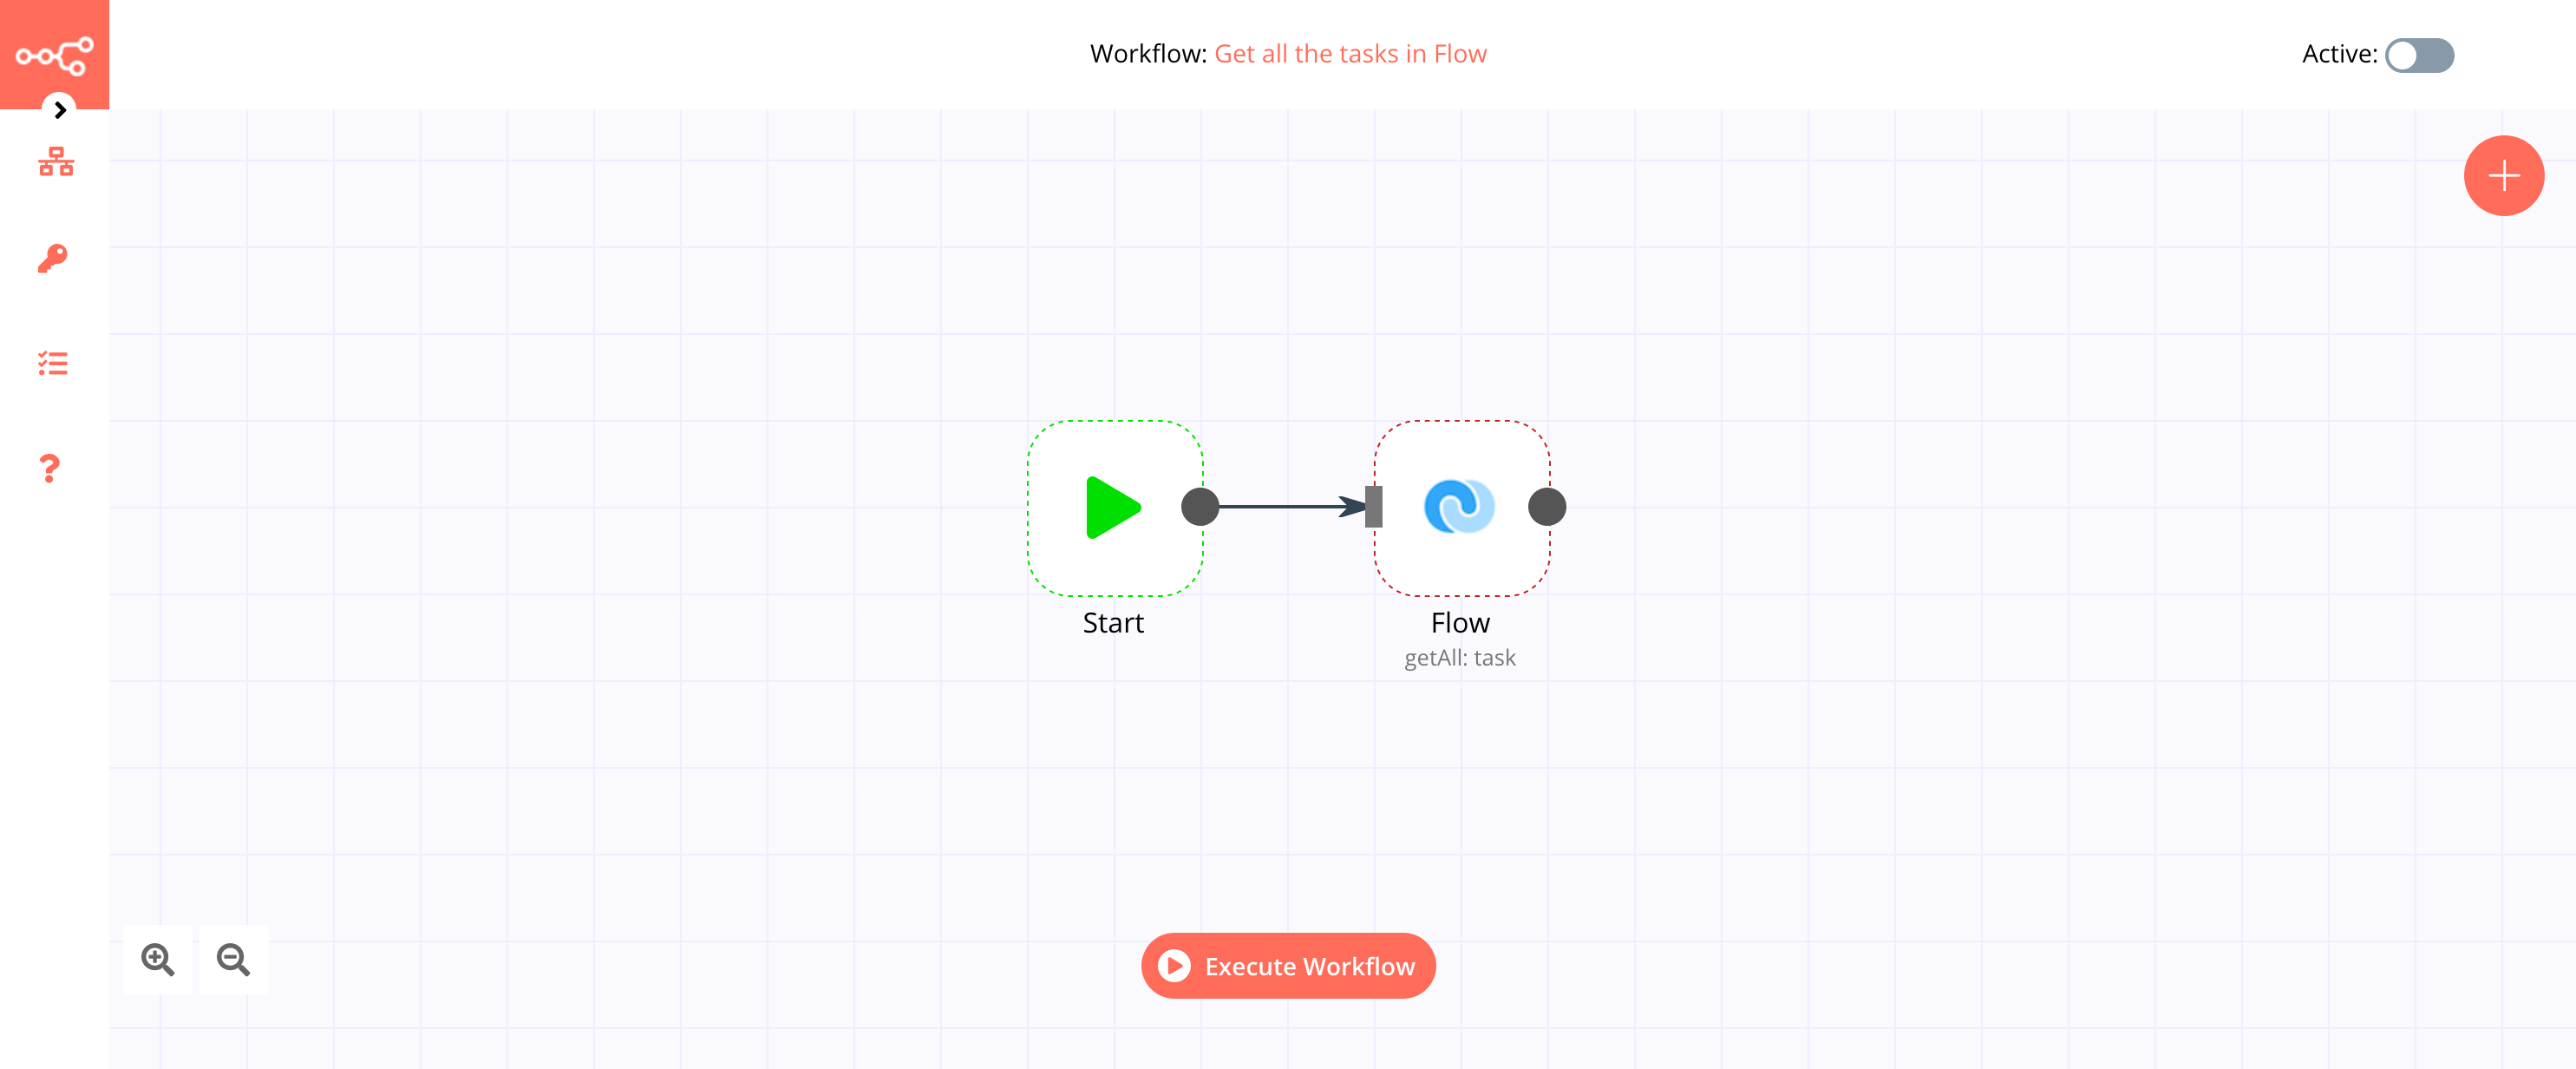 A workflow with the Flow node